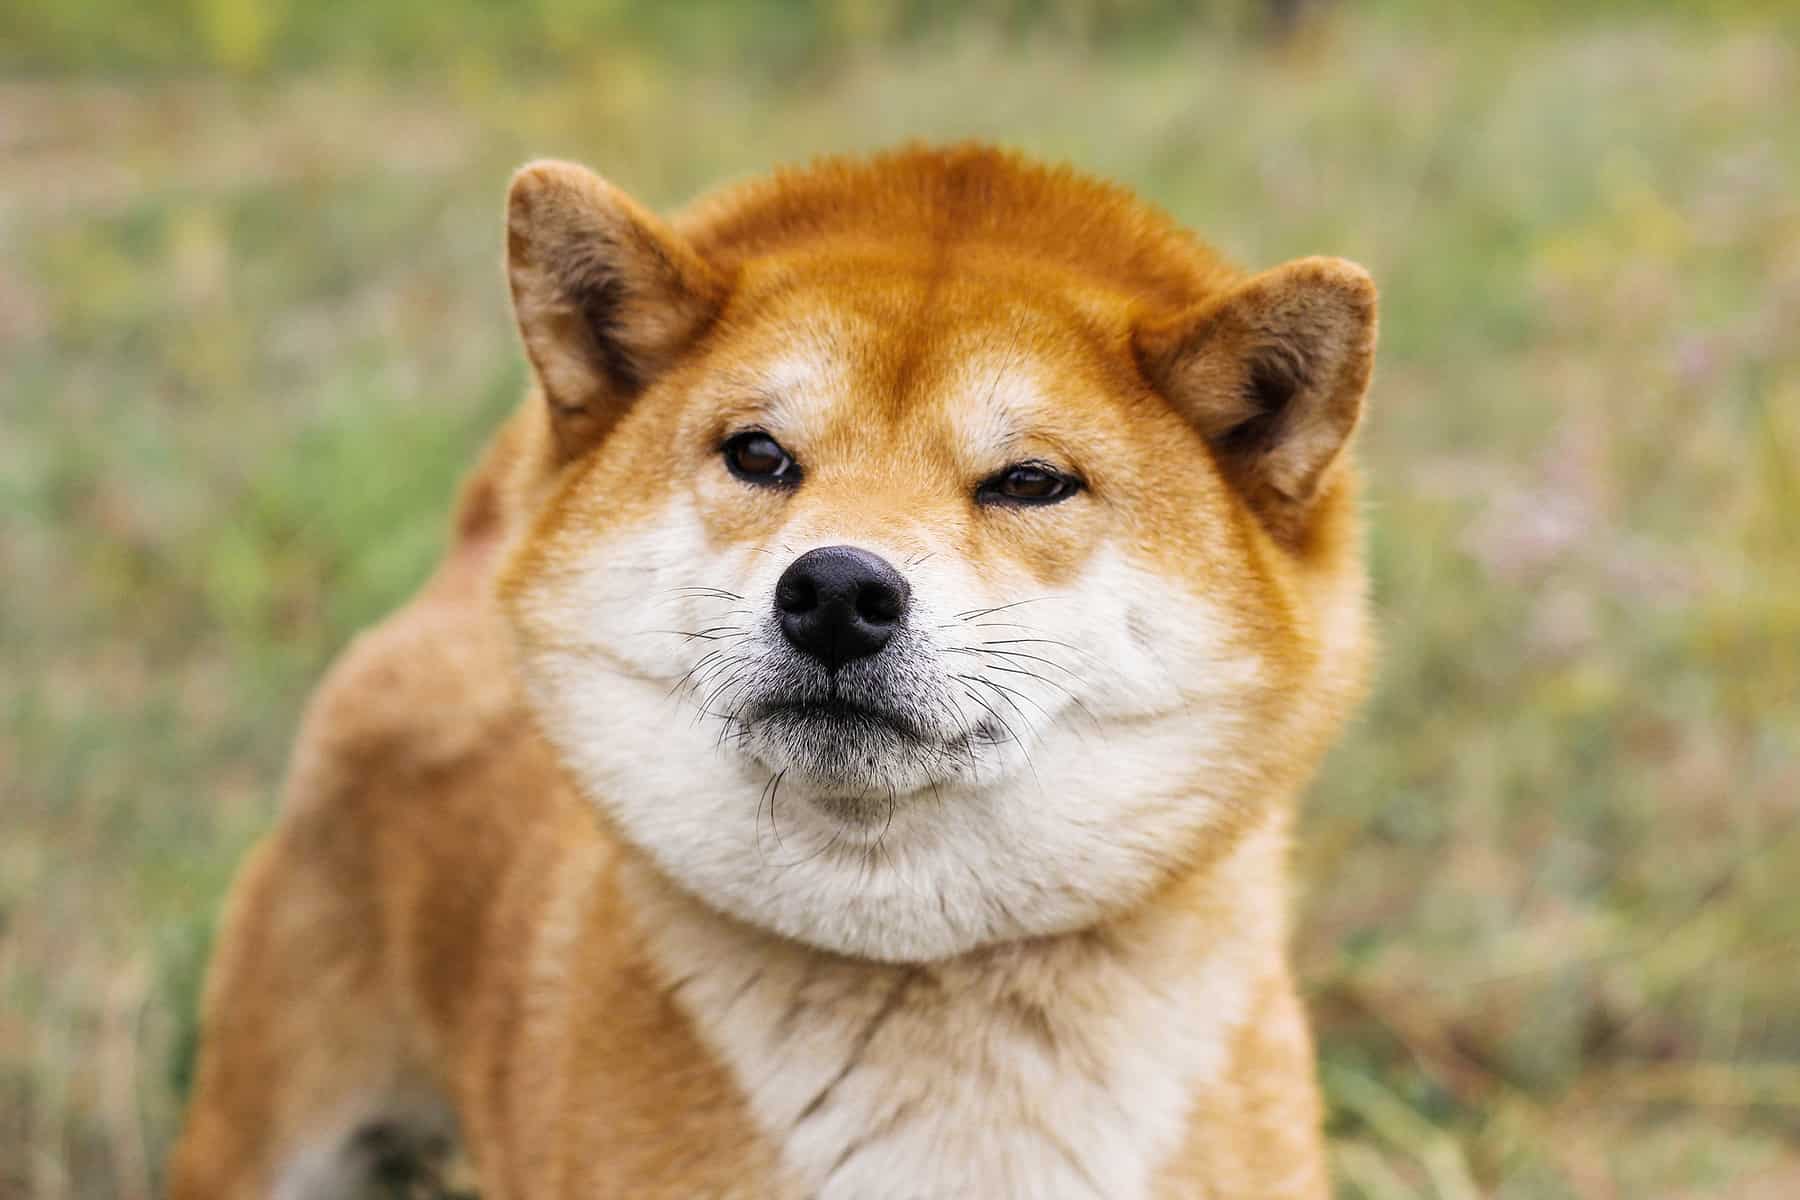 Shiba Inu Dog Price: How Much Does a Shiba Puppy Cost?